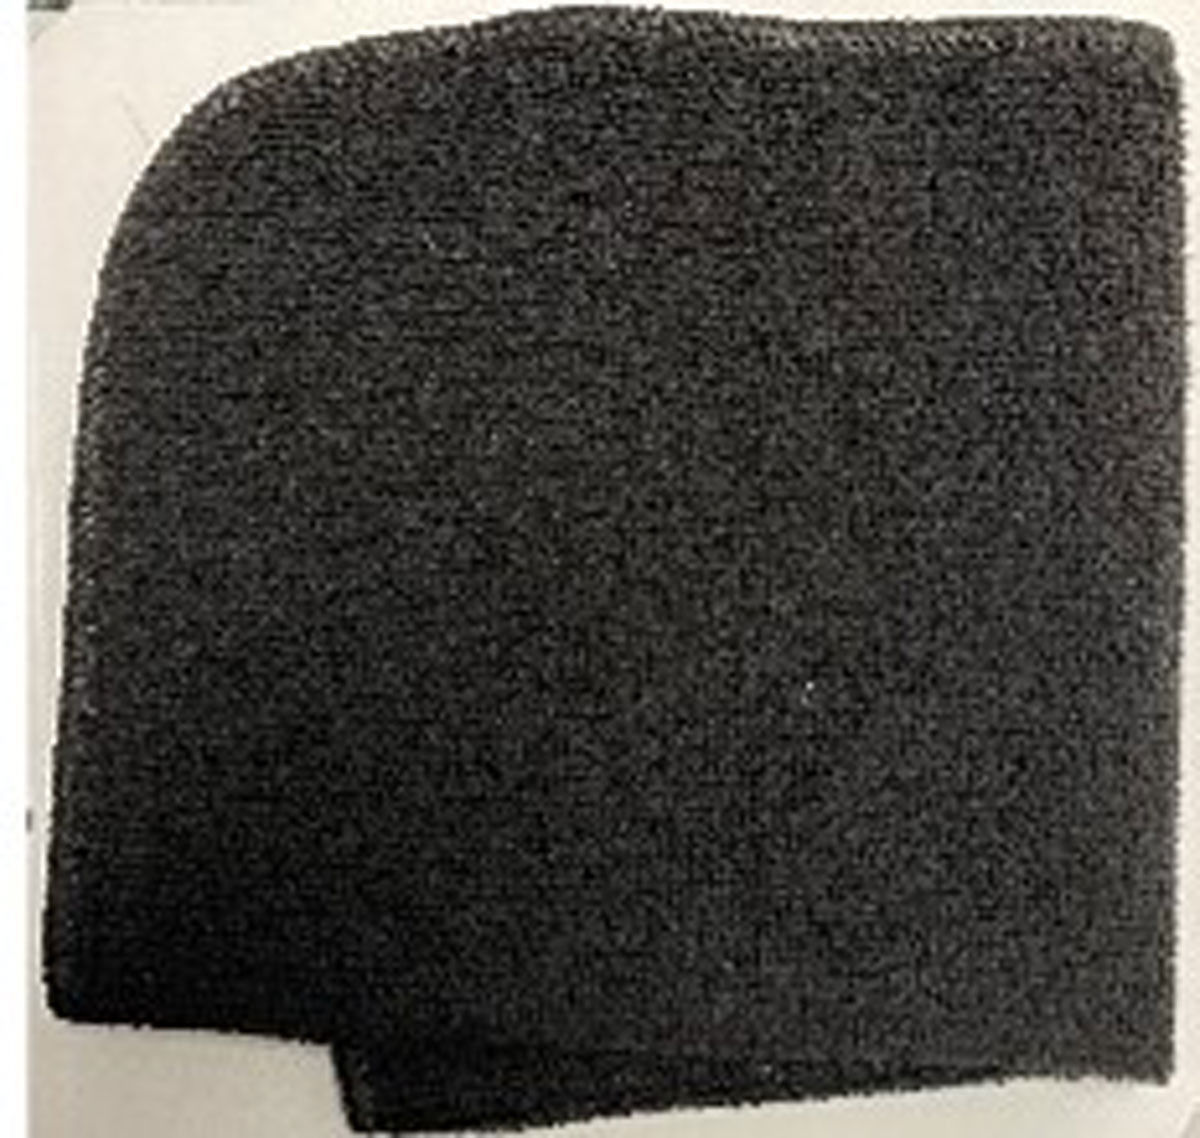 Is this black microfiber cloth the color of the product?